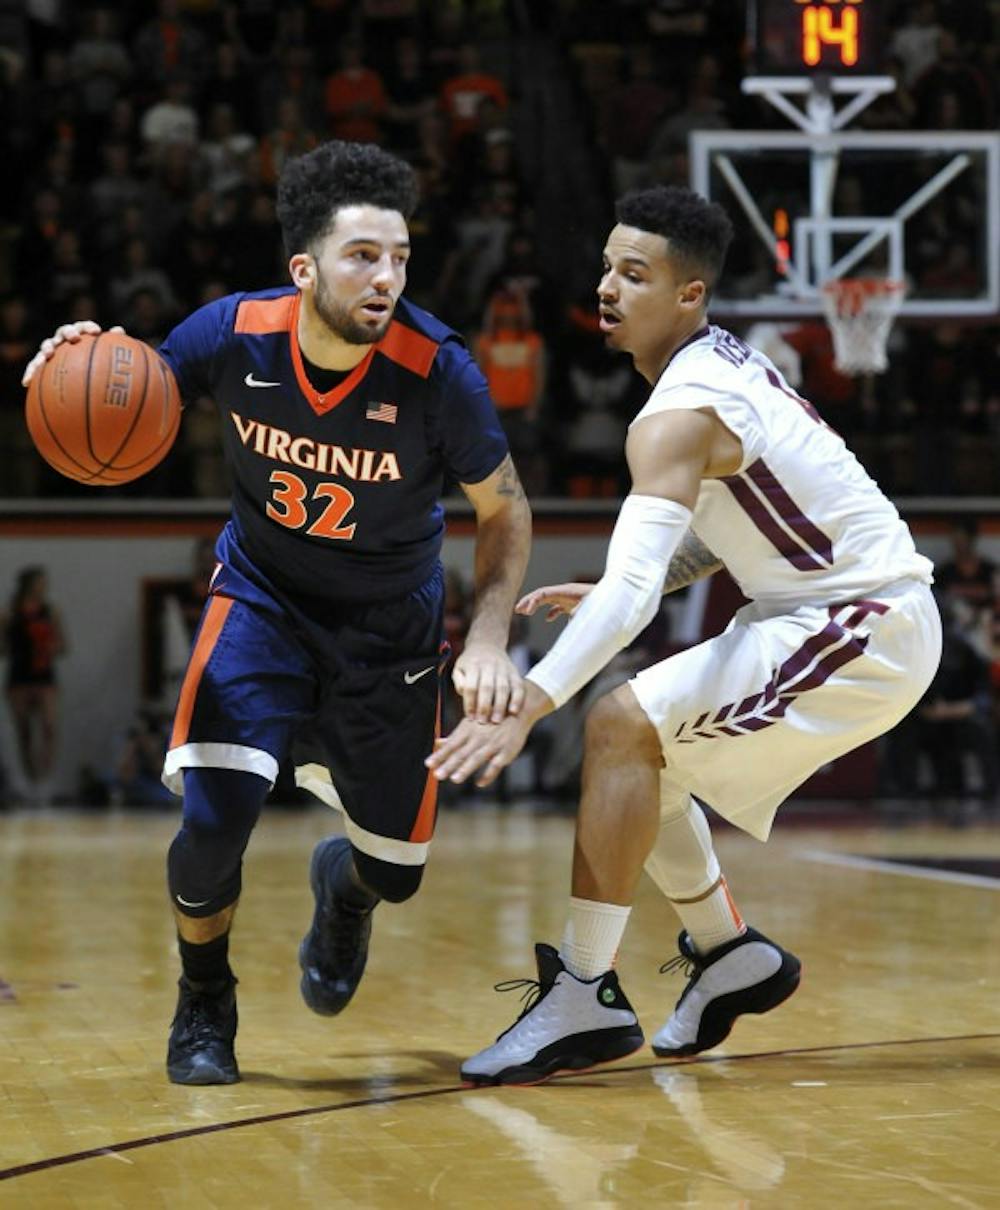 <p>London&nbsp;Perrantes led Virginia with 22 points after shooting 7-9 from beyond the arc. His seven threes Monday were a career high.</p>